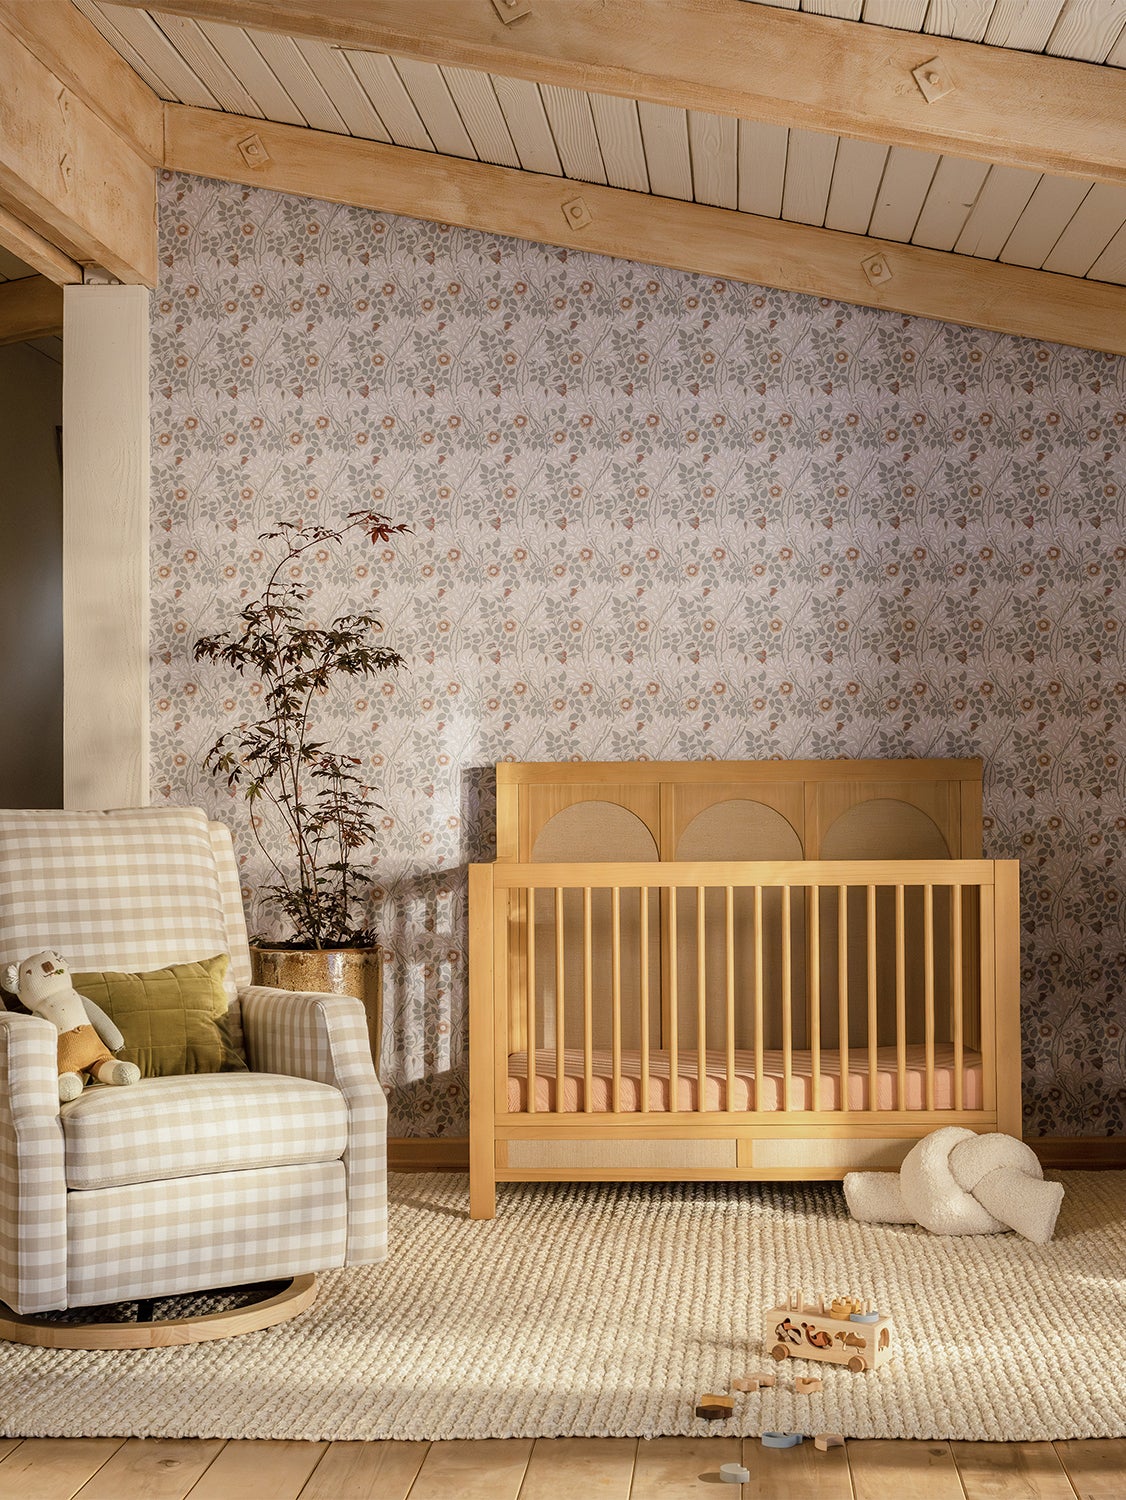 We Found the Stylish Convertible Crib That New Parents Will Love for Years to Come